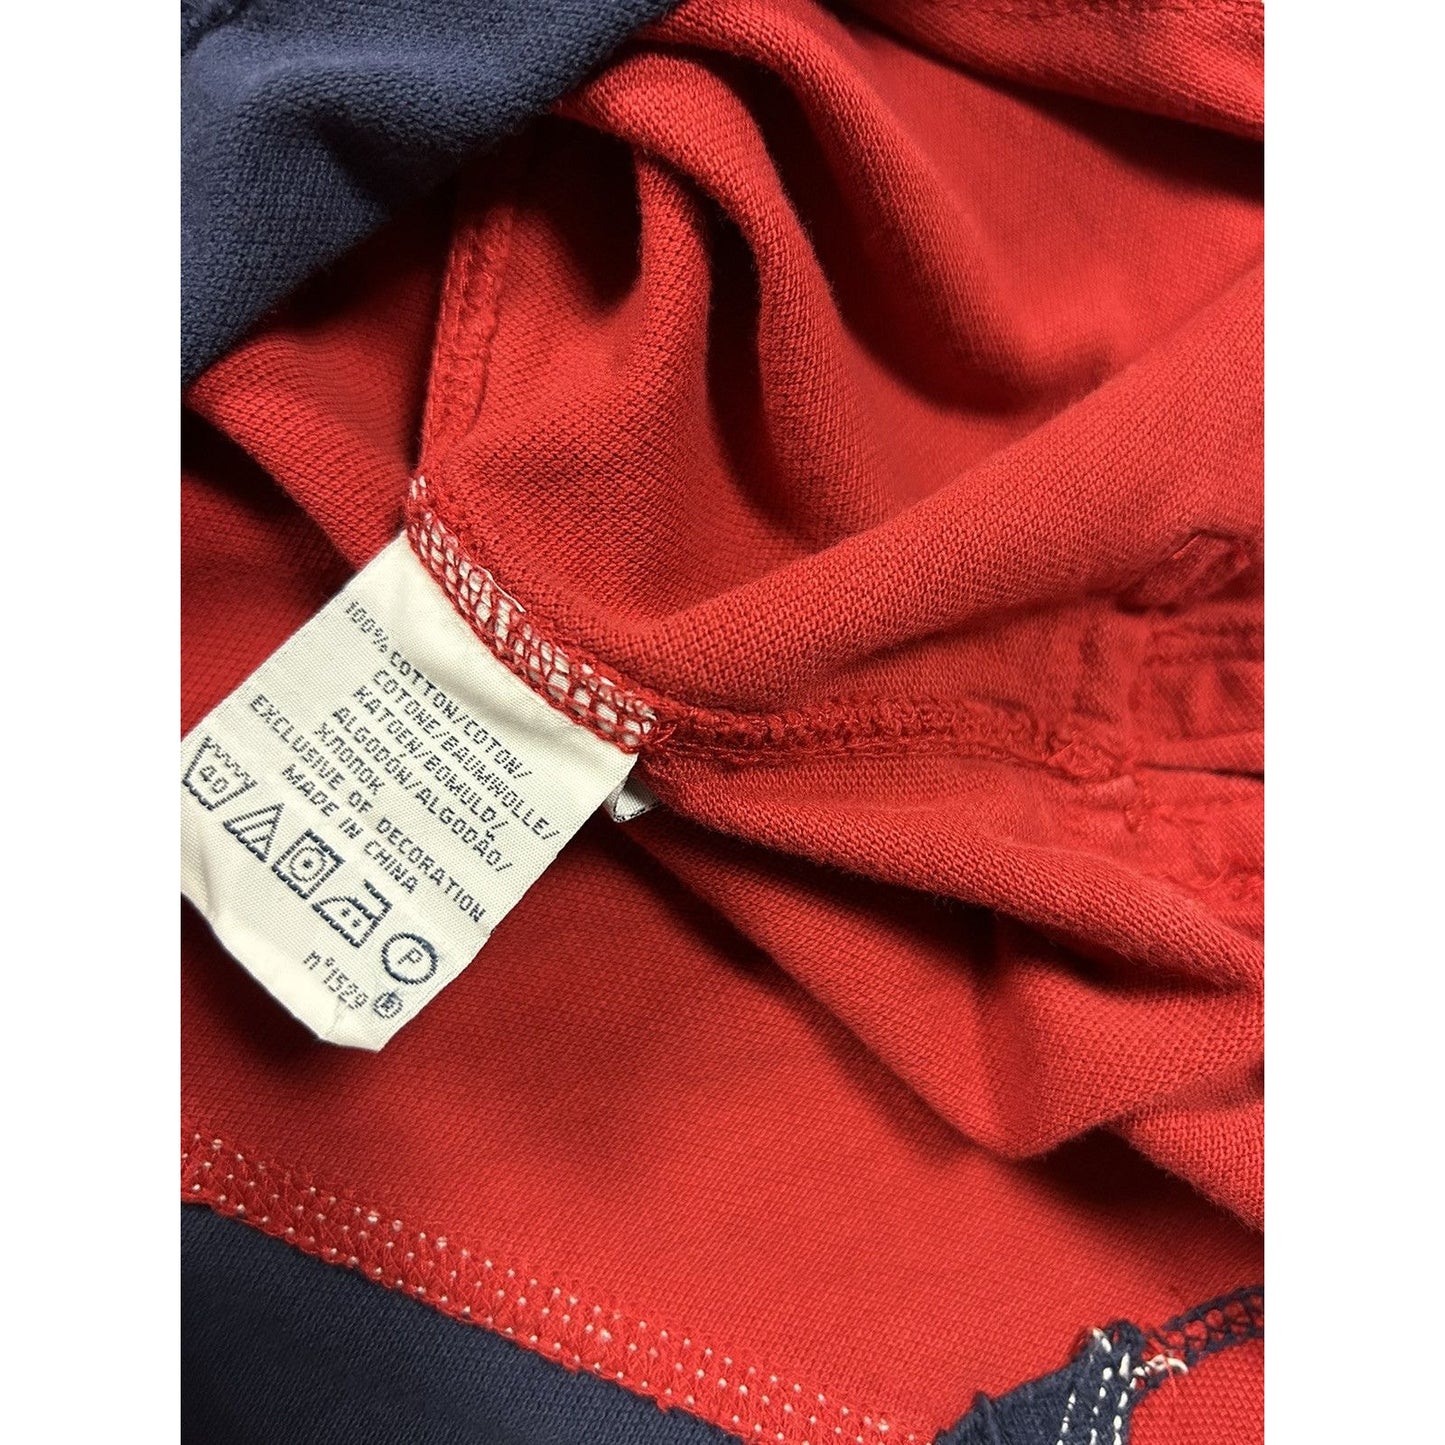 Chief Keef Polo Ralph Lauren vintage red navy big pony